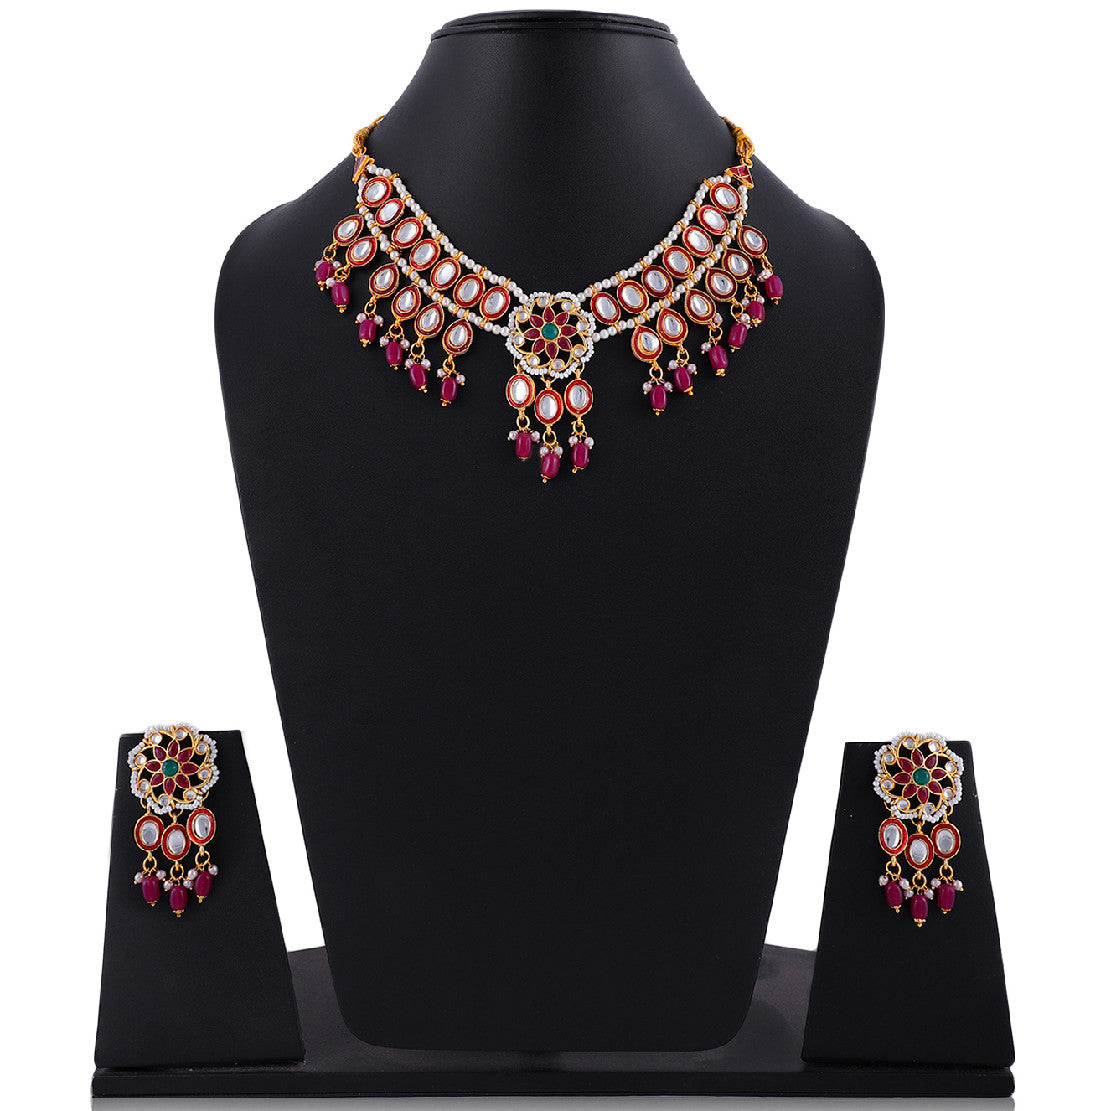 Best Traditional Handcrafted Designed by Mekkna of Big Stone Necklace set for Women | Buy This Necklace Online from Mekkna